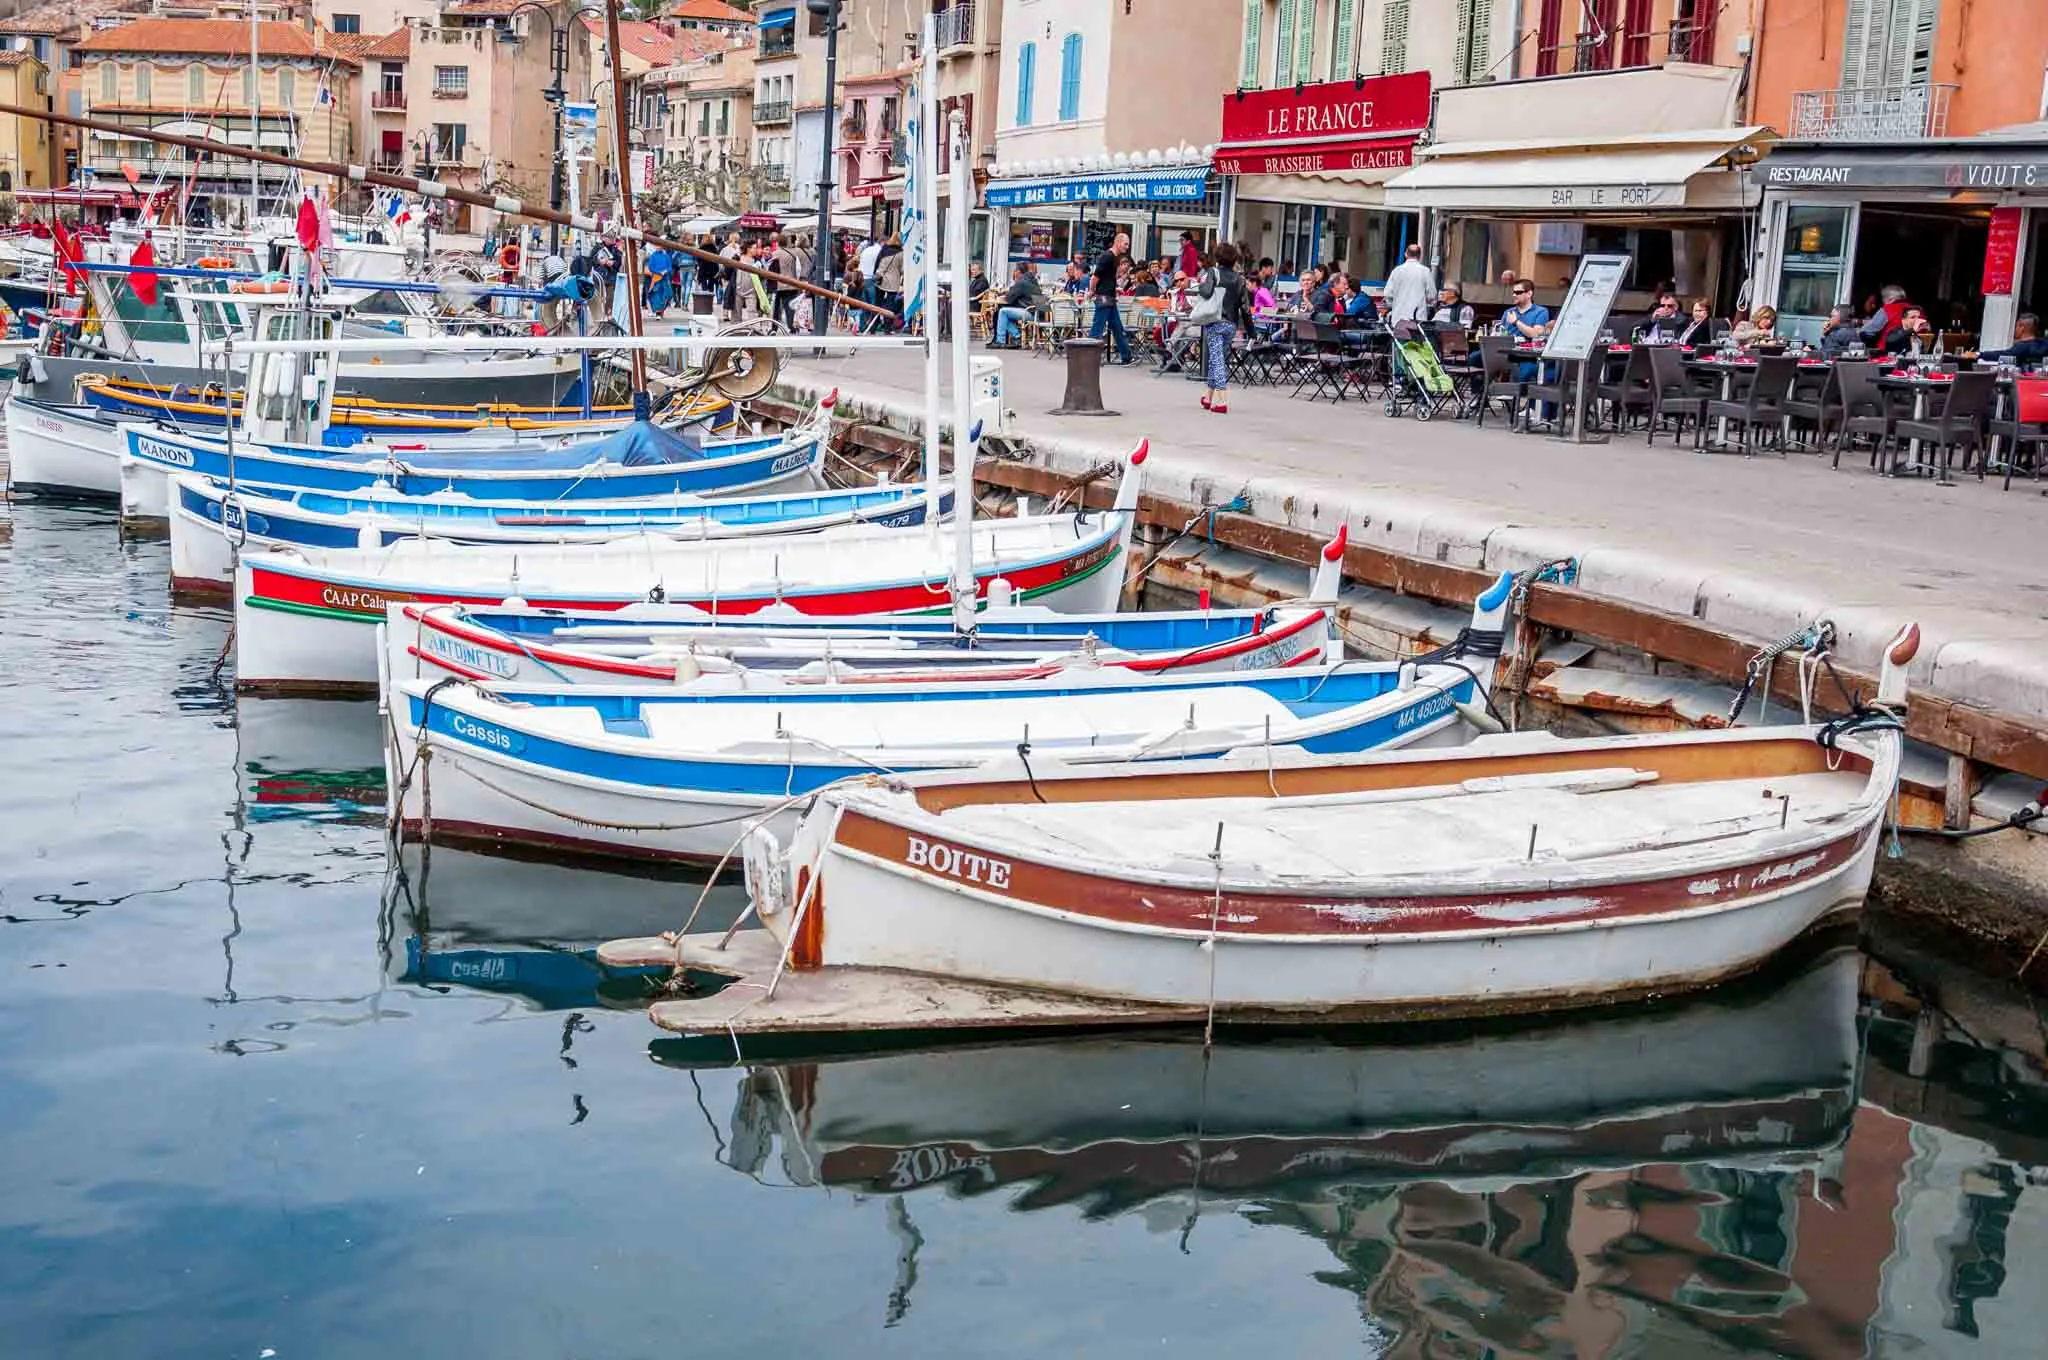 Boats in the port of Cassis in France